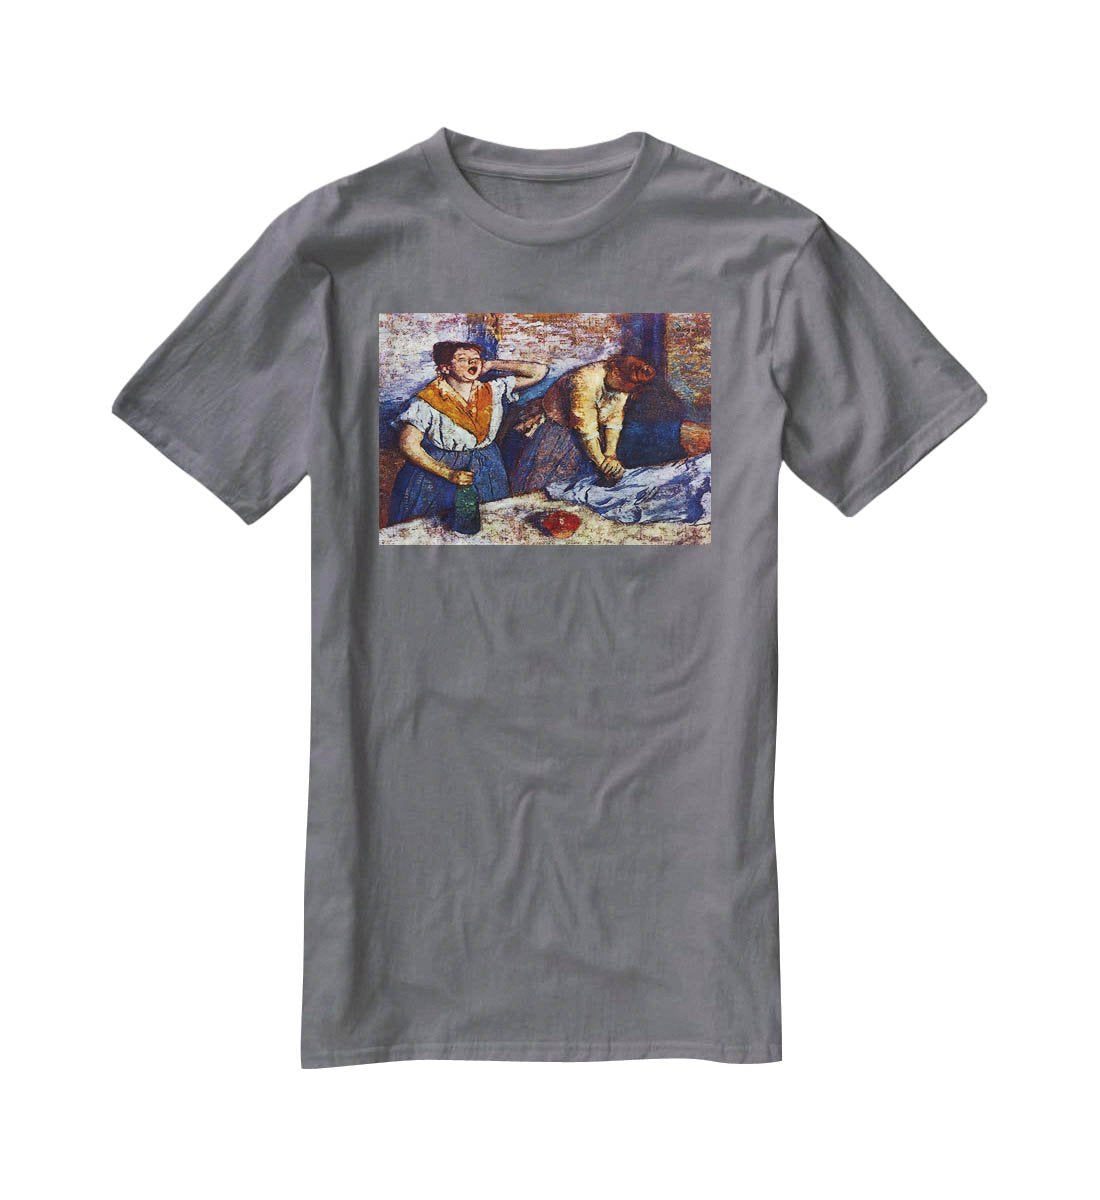 Two cleaning women by Degas T-Shirt - Canvas Art Rocks - 3